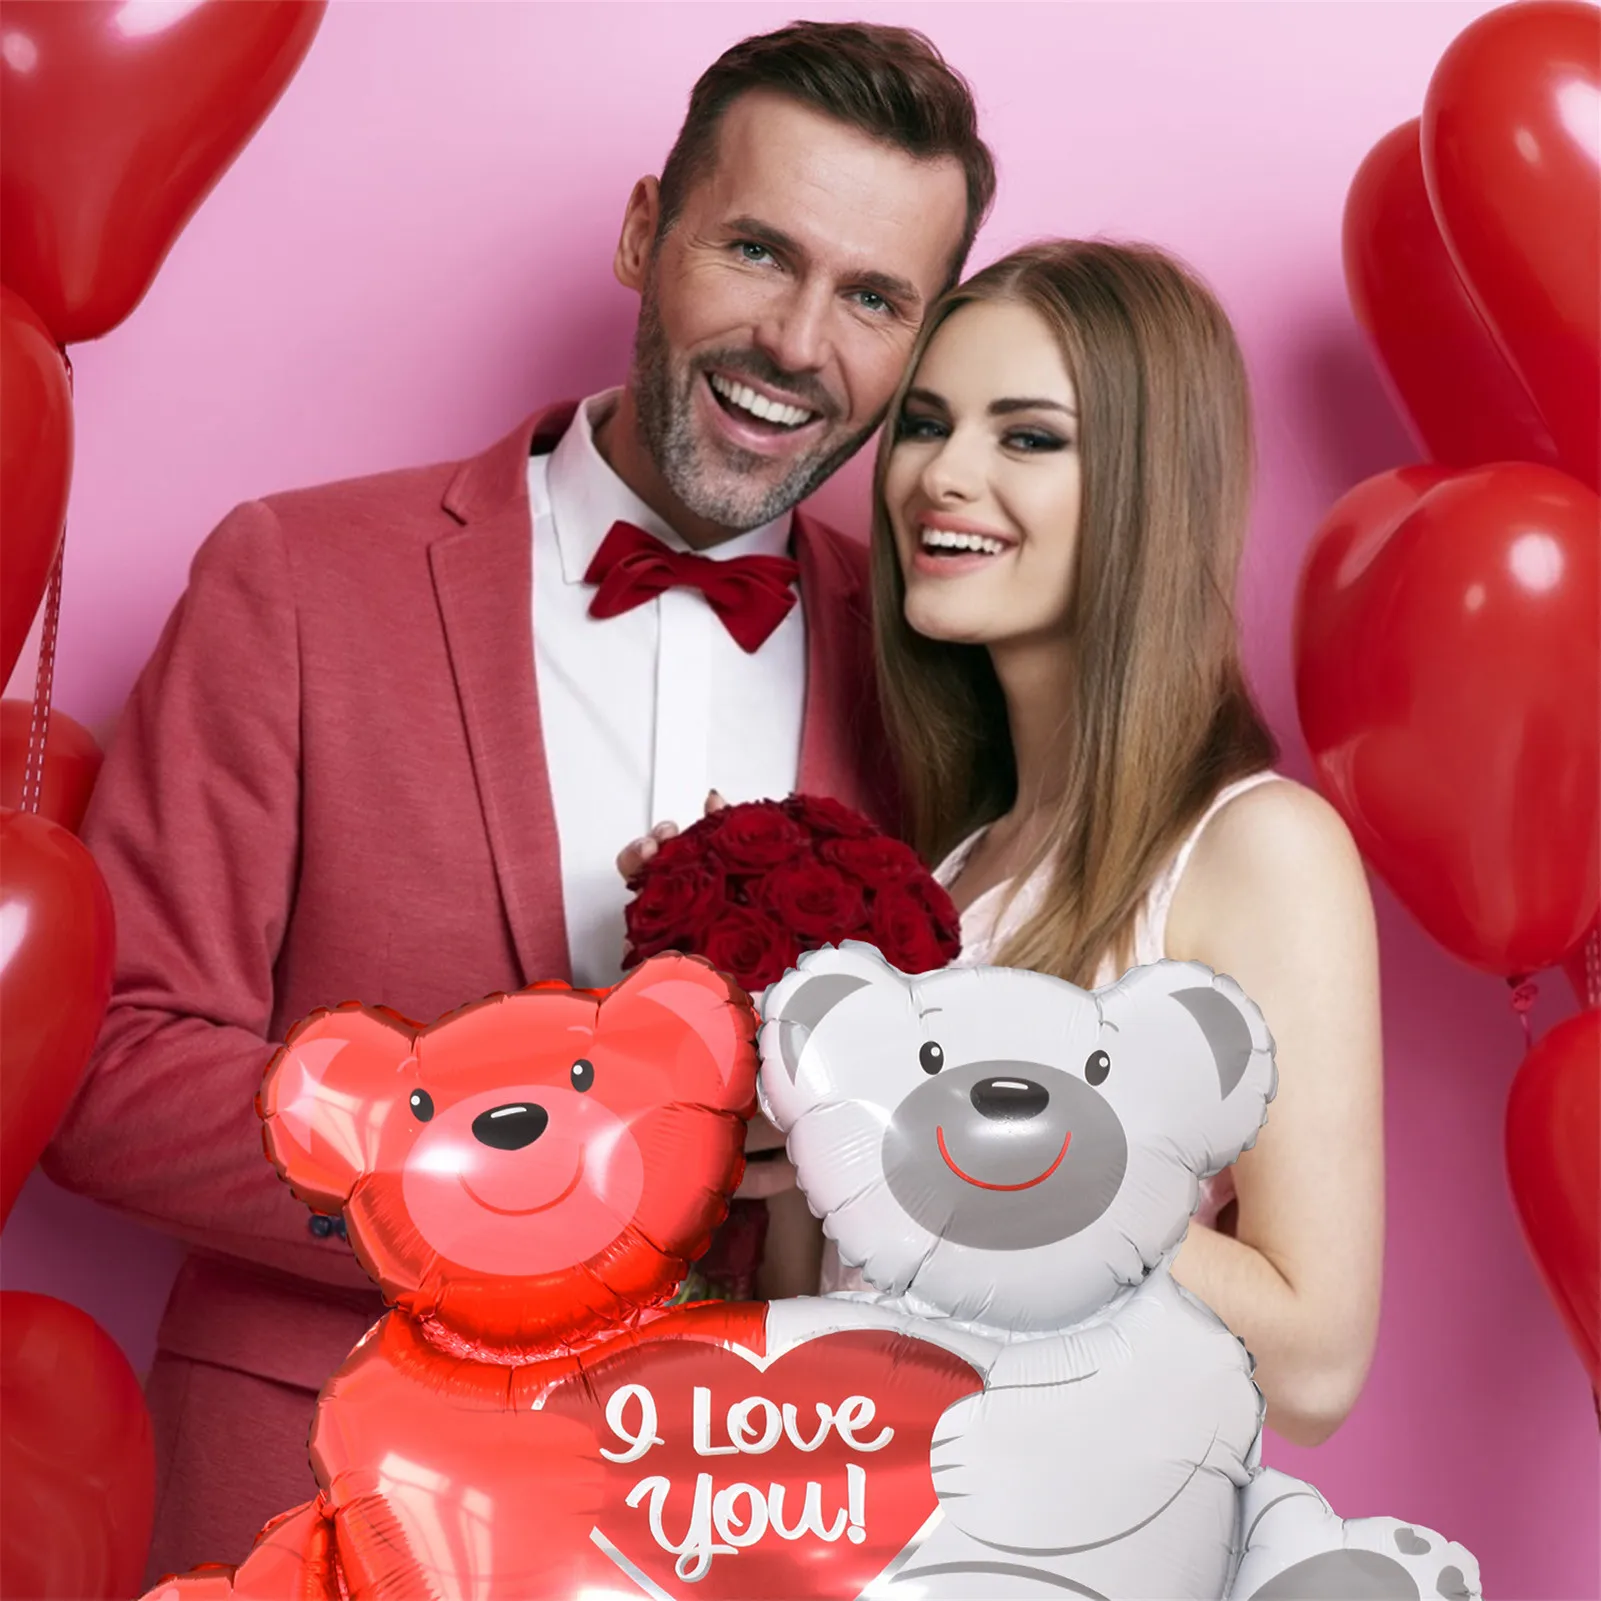 

Romantic Anniversary Wedding i Love You Balloons Set Heart Confetti Ballons Valentine Day Decorations For Party Love Red Baloon